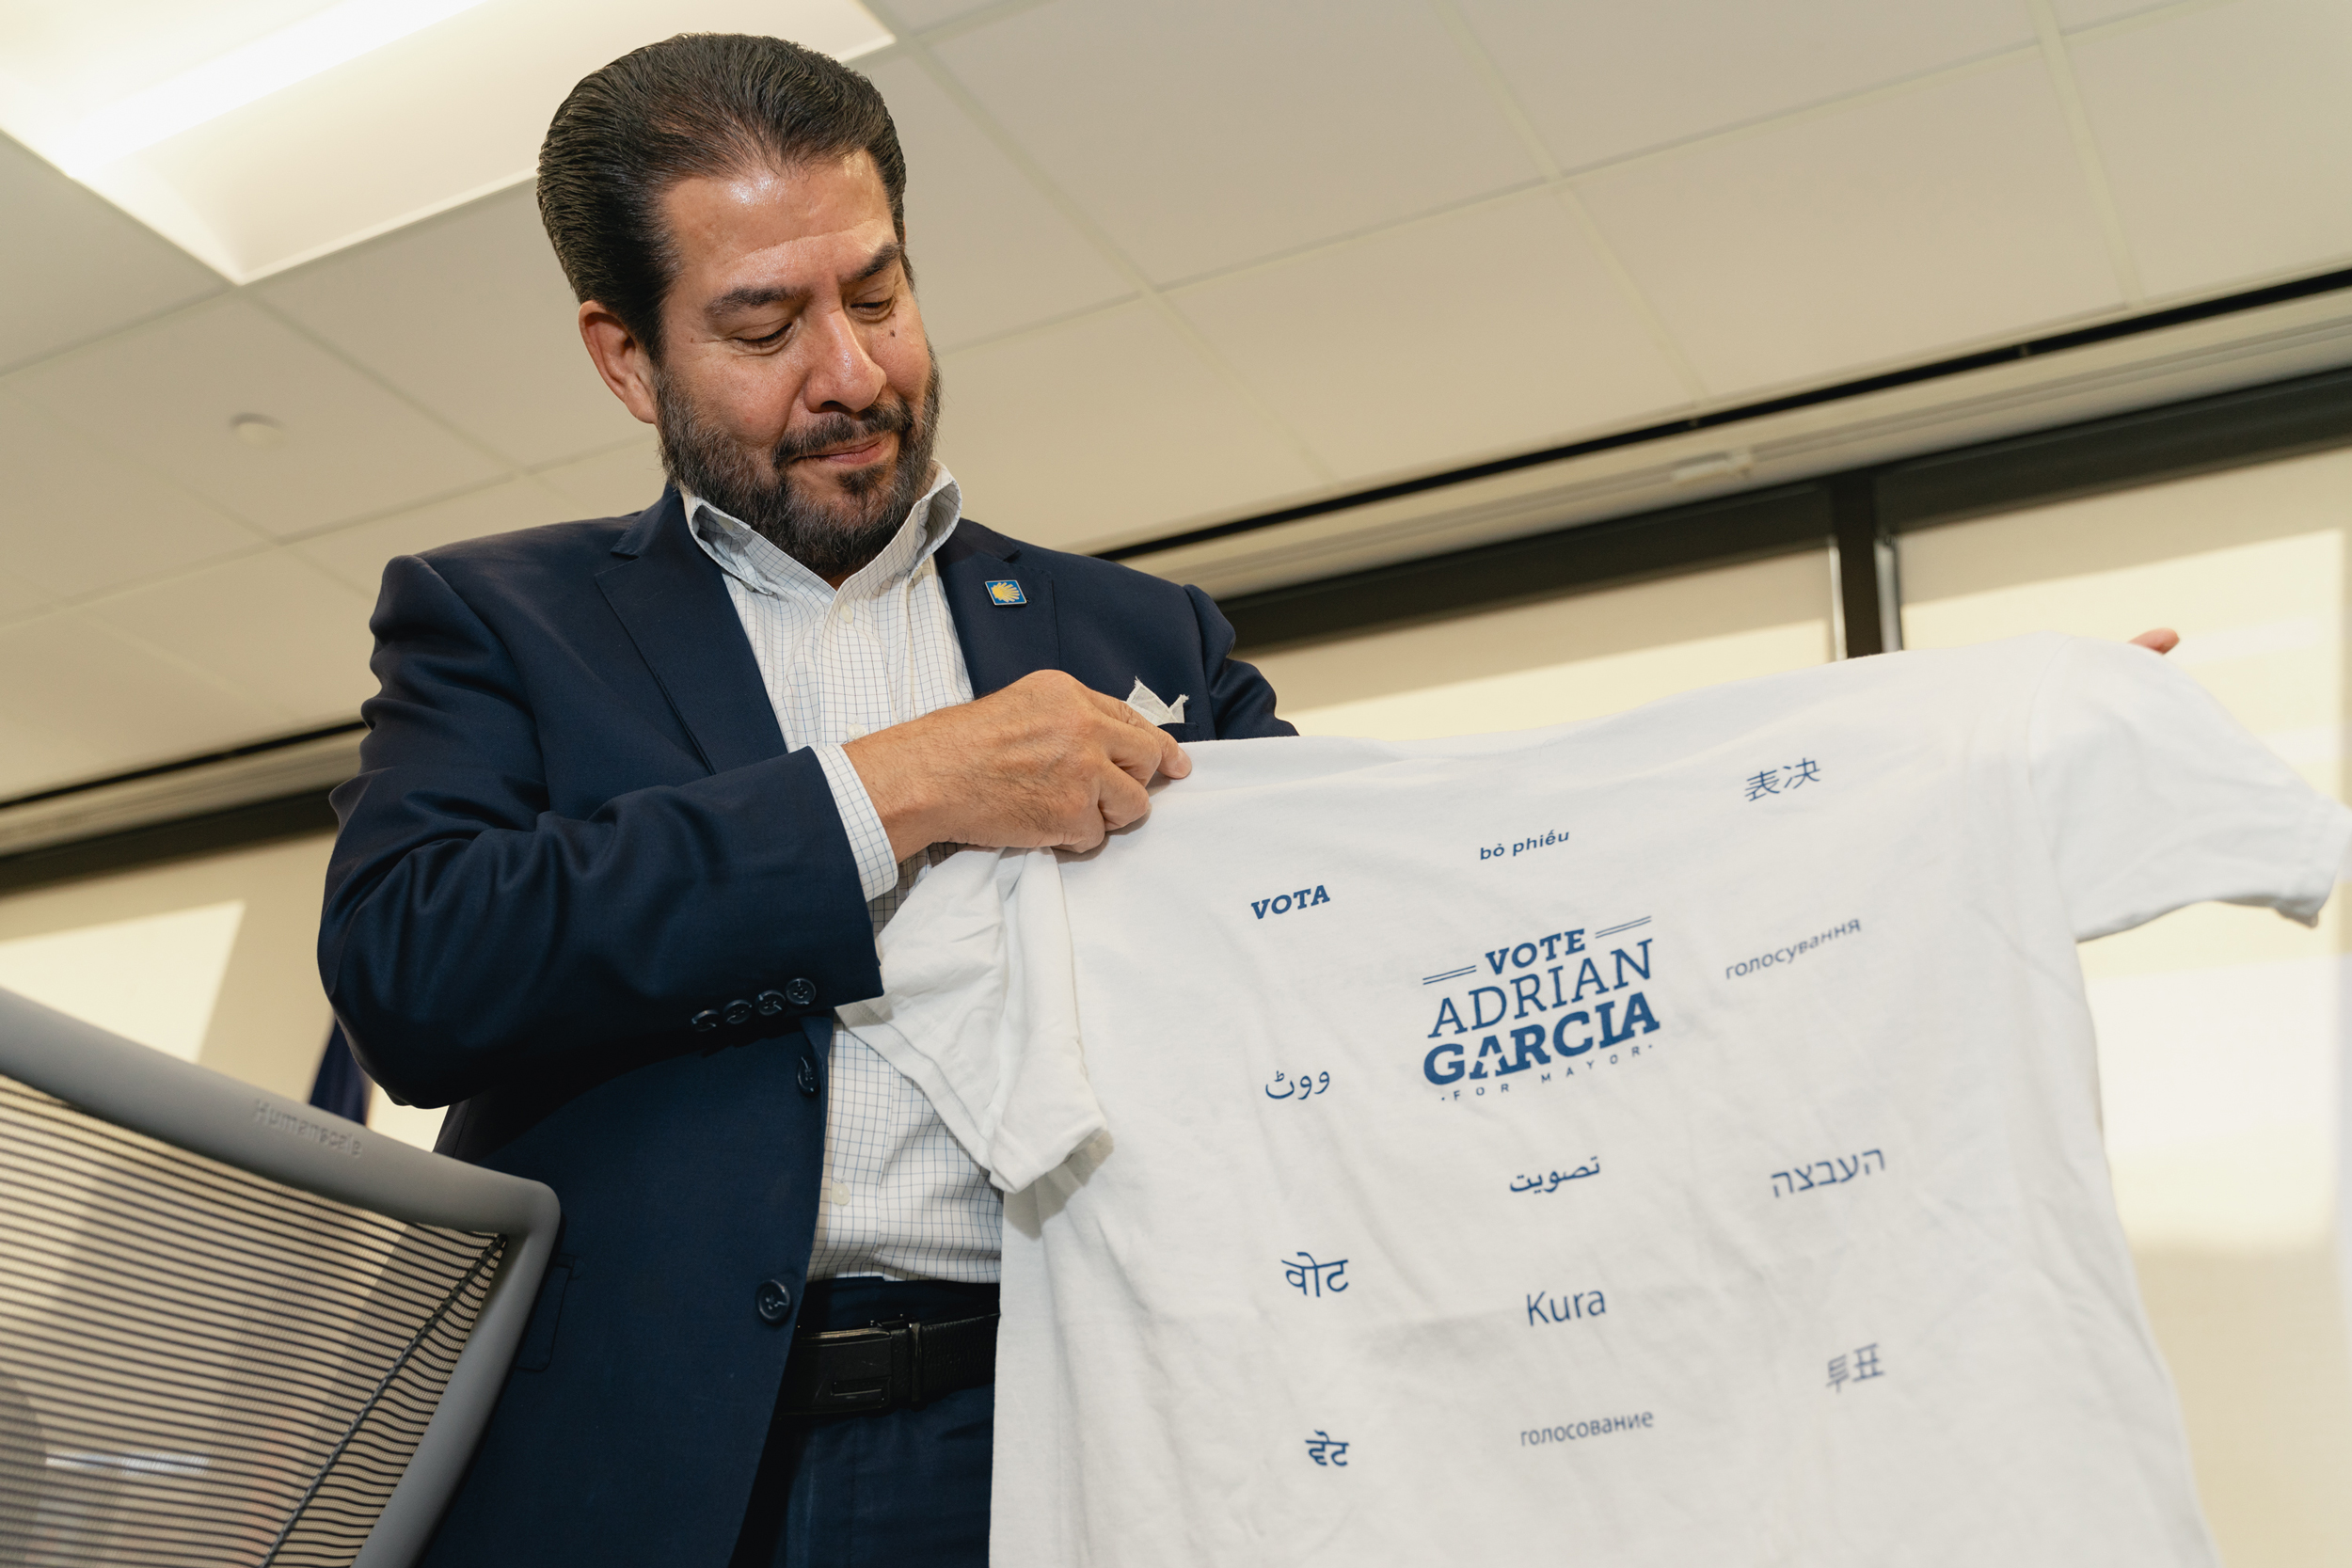 Adrian Garcia shows a T-shirt promoting his mayoral candidacy in Houston in 2015.